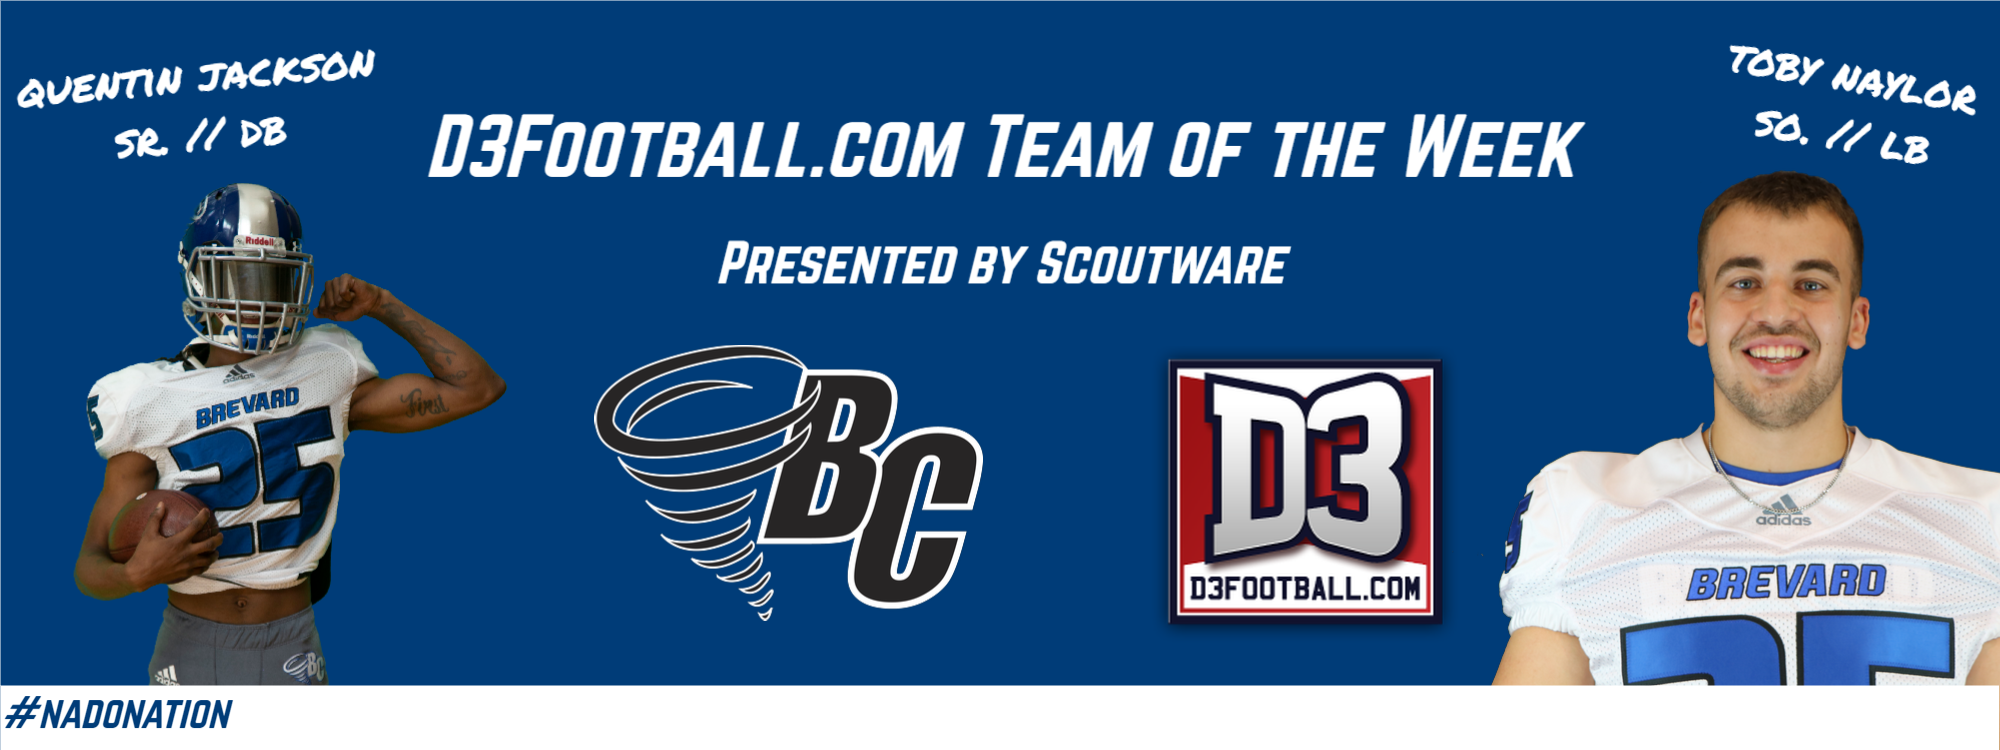 Jackson, Naylor Selected to D3football.com Team of the Week Following Averett Win